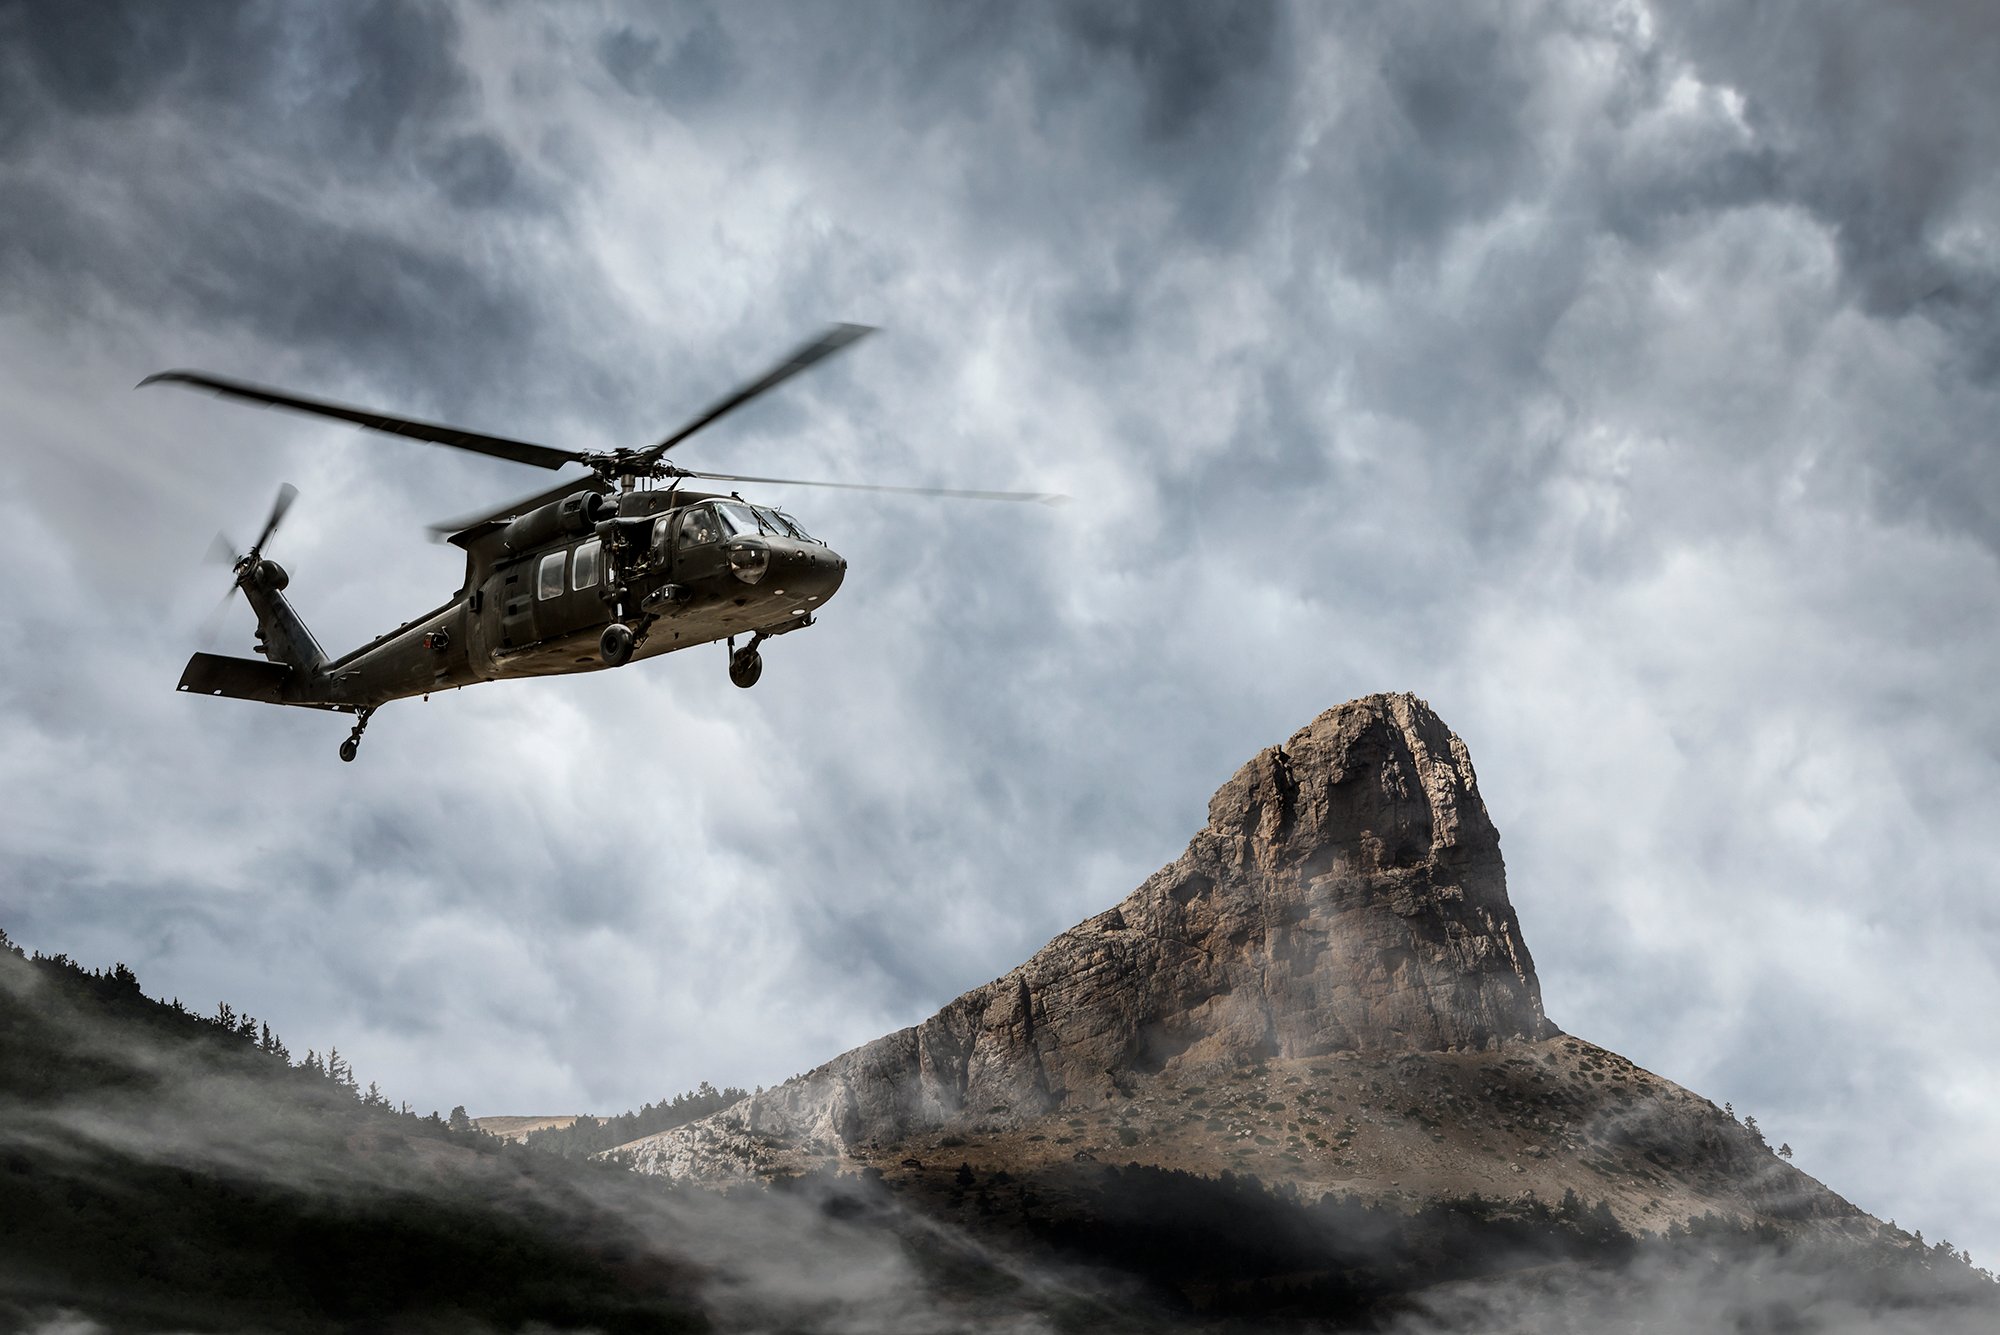 RTI_Defense-Aerospace_helicopter-flying-mountain_0818_iStock-490997442 (1)